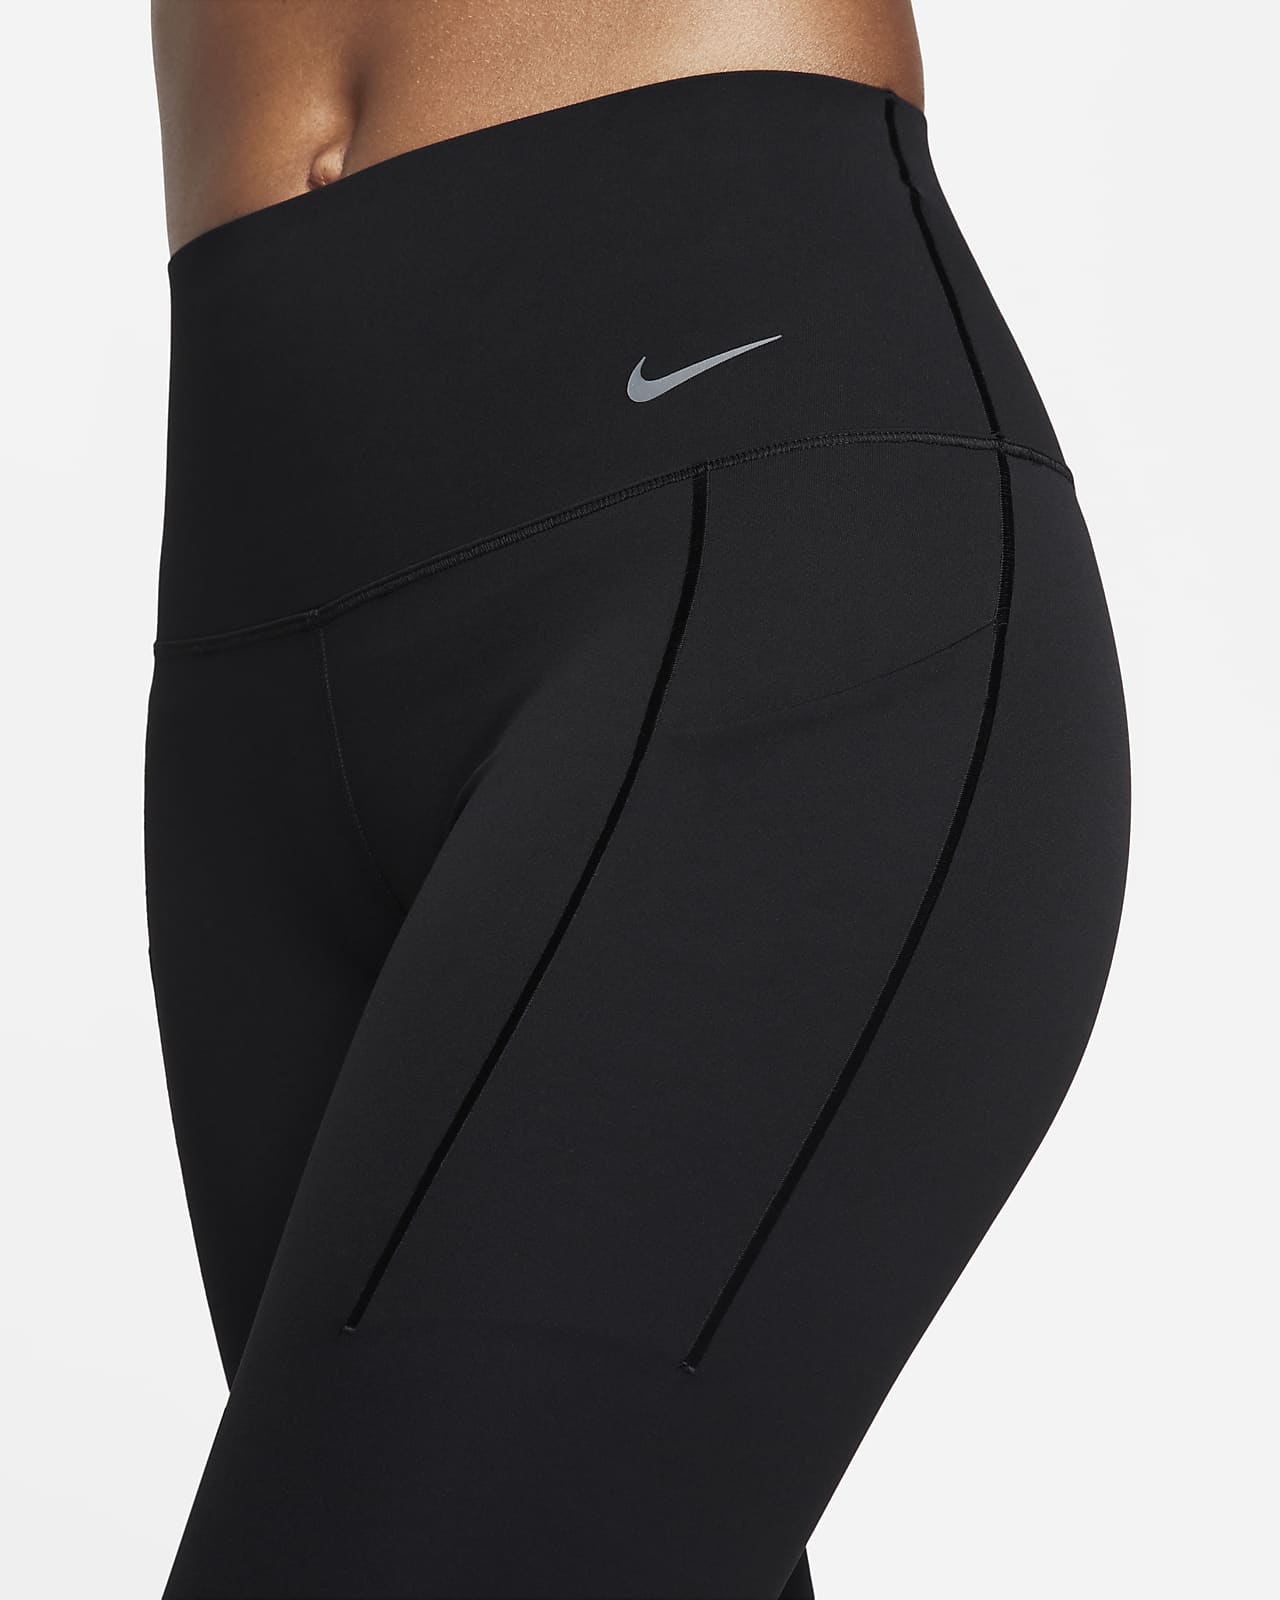 NIKE POWER LEGENDARY Tight Fit Training Tights Ankle Zip MID RISE DRI-FIT